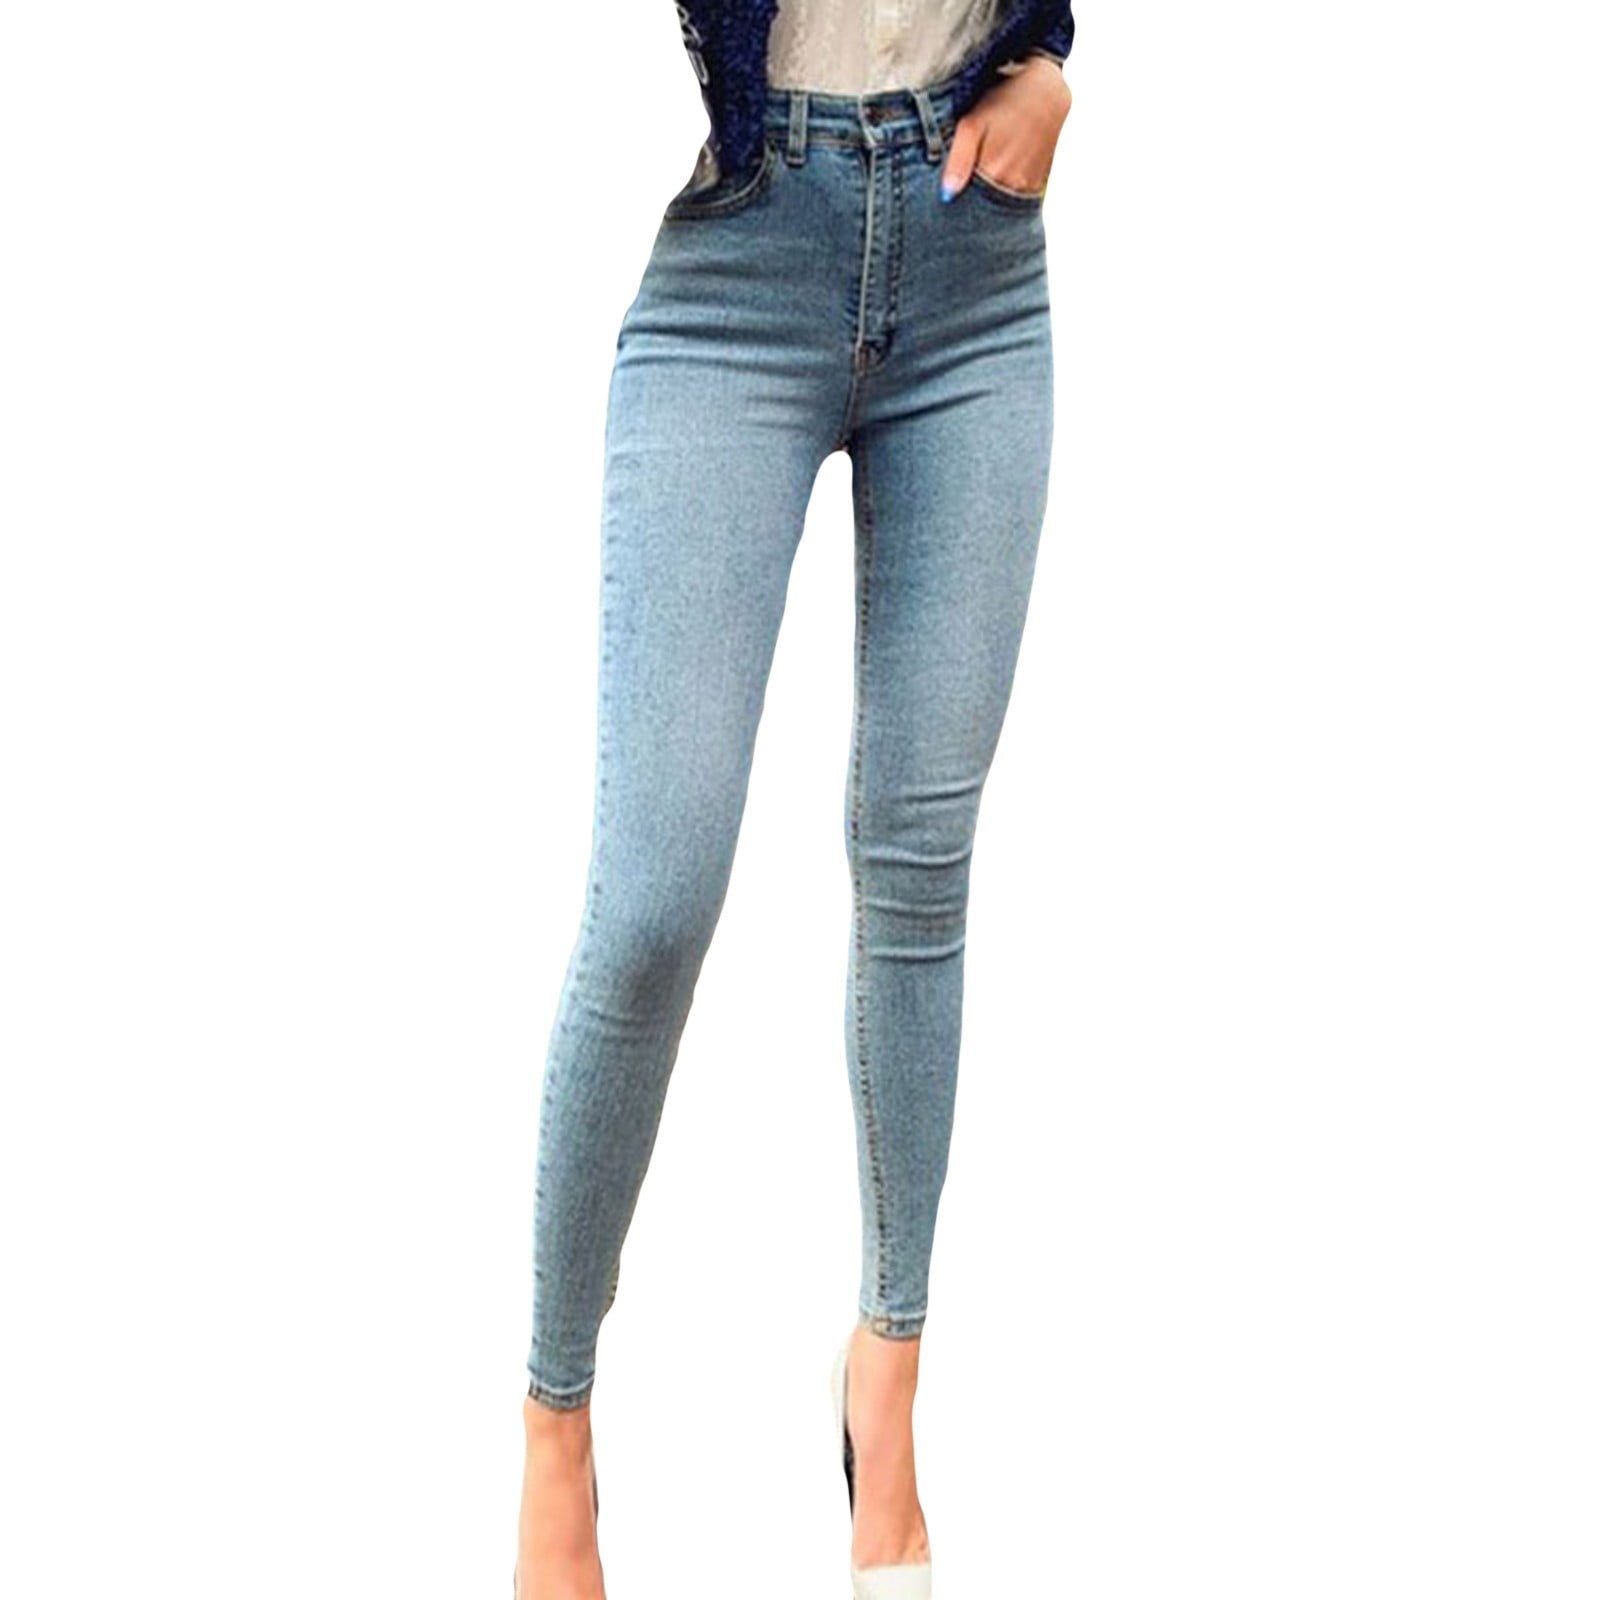 Women's Ultra Skinny High Waisted Jeans Stretch Slim Fitted Blue Denim Pants  Classic Jeans Leggings Pencil Pants Trouser 